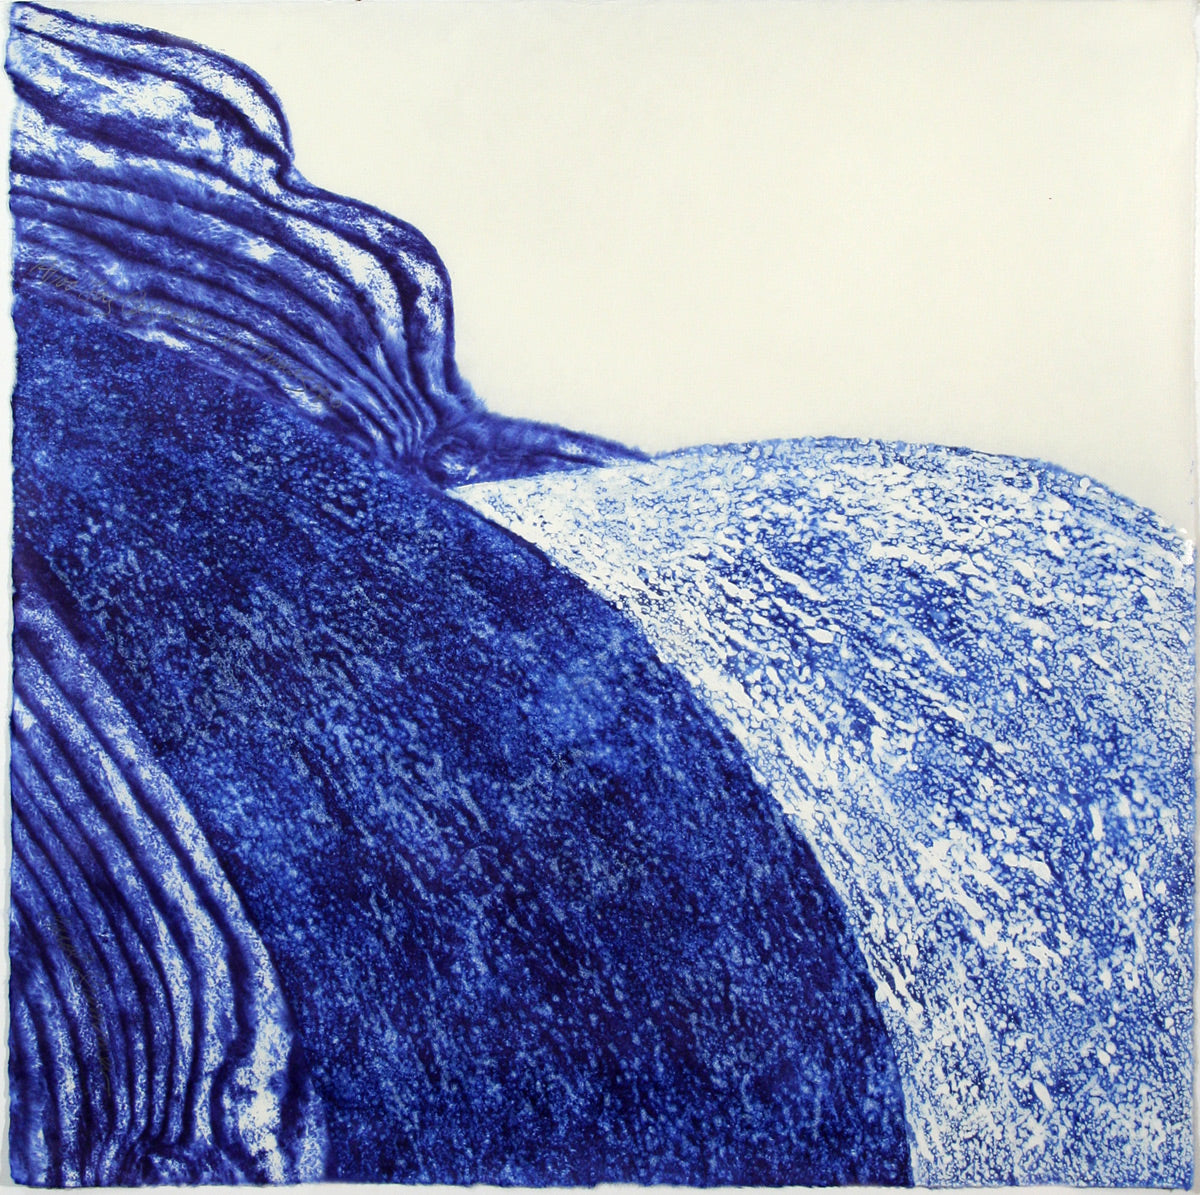 Woodcut of abstract indigo forms against white paper